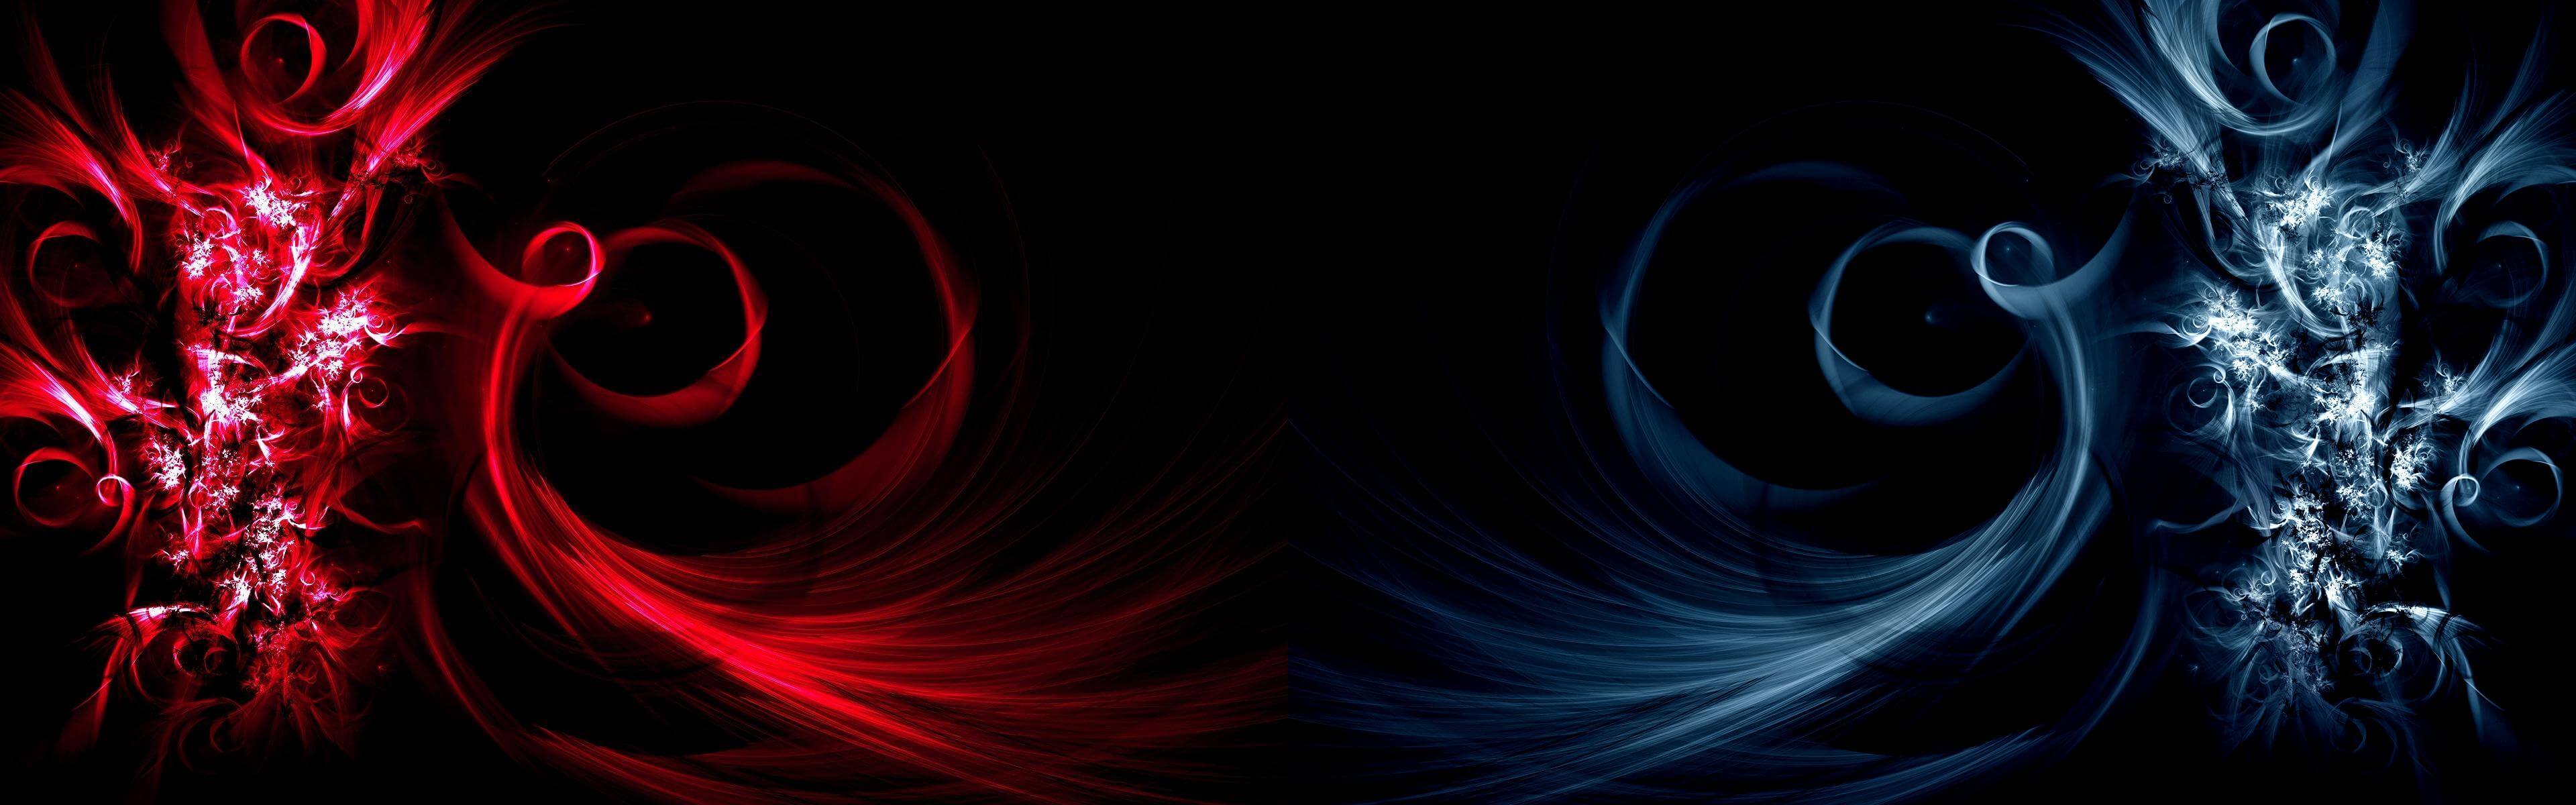 Dualistic Red & Blue Abstract 4K Wallpaper • GamePhD